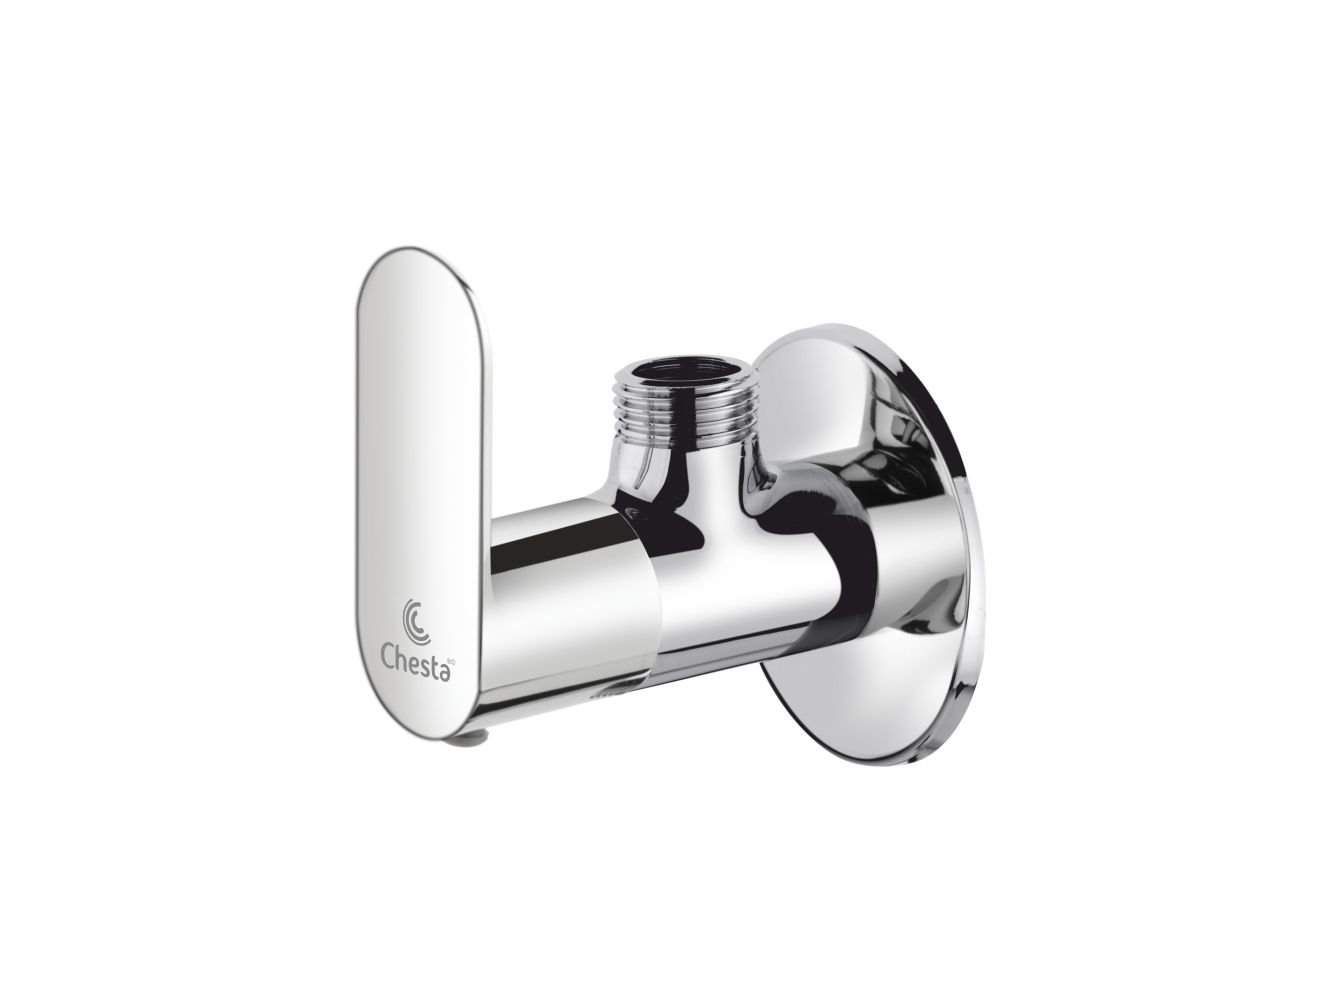 MO - 1003 - Angle Cock with Wall Flange by Chesta Bath